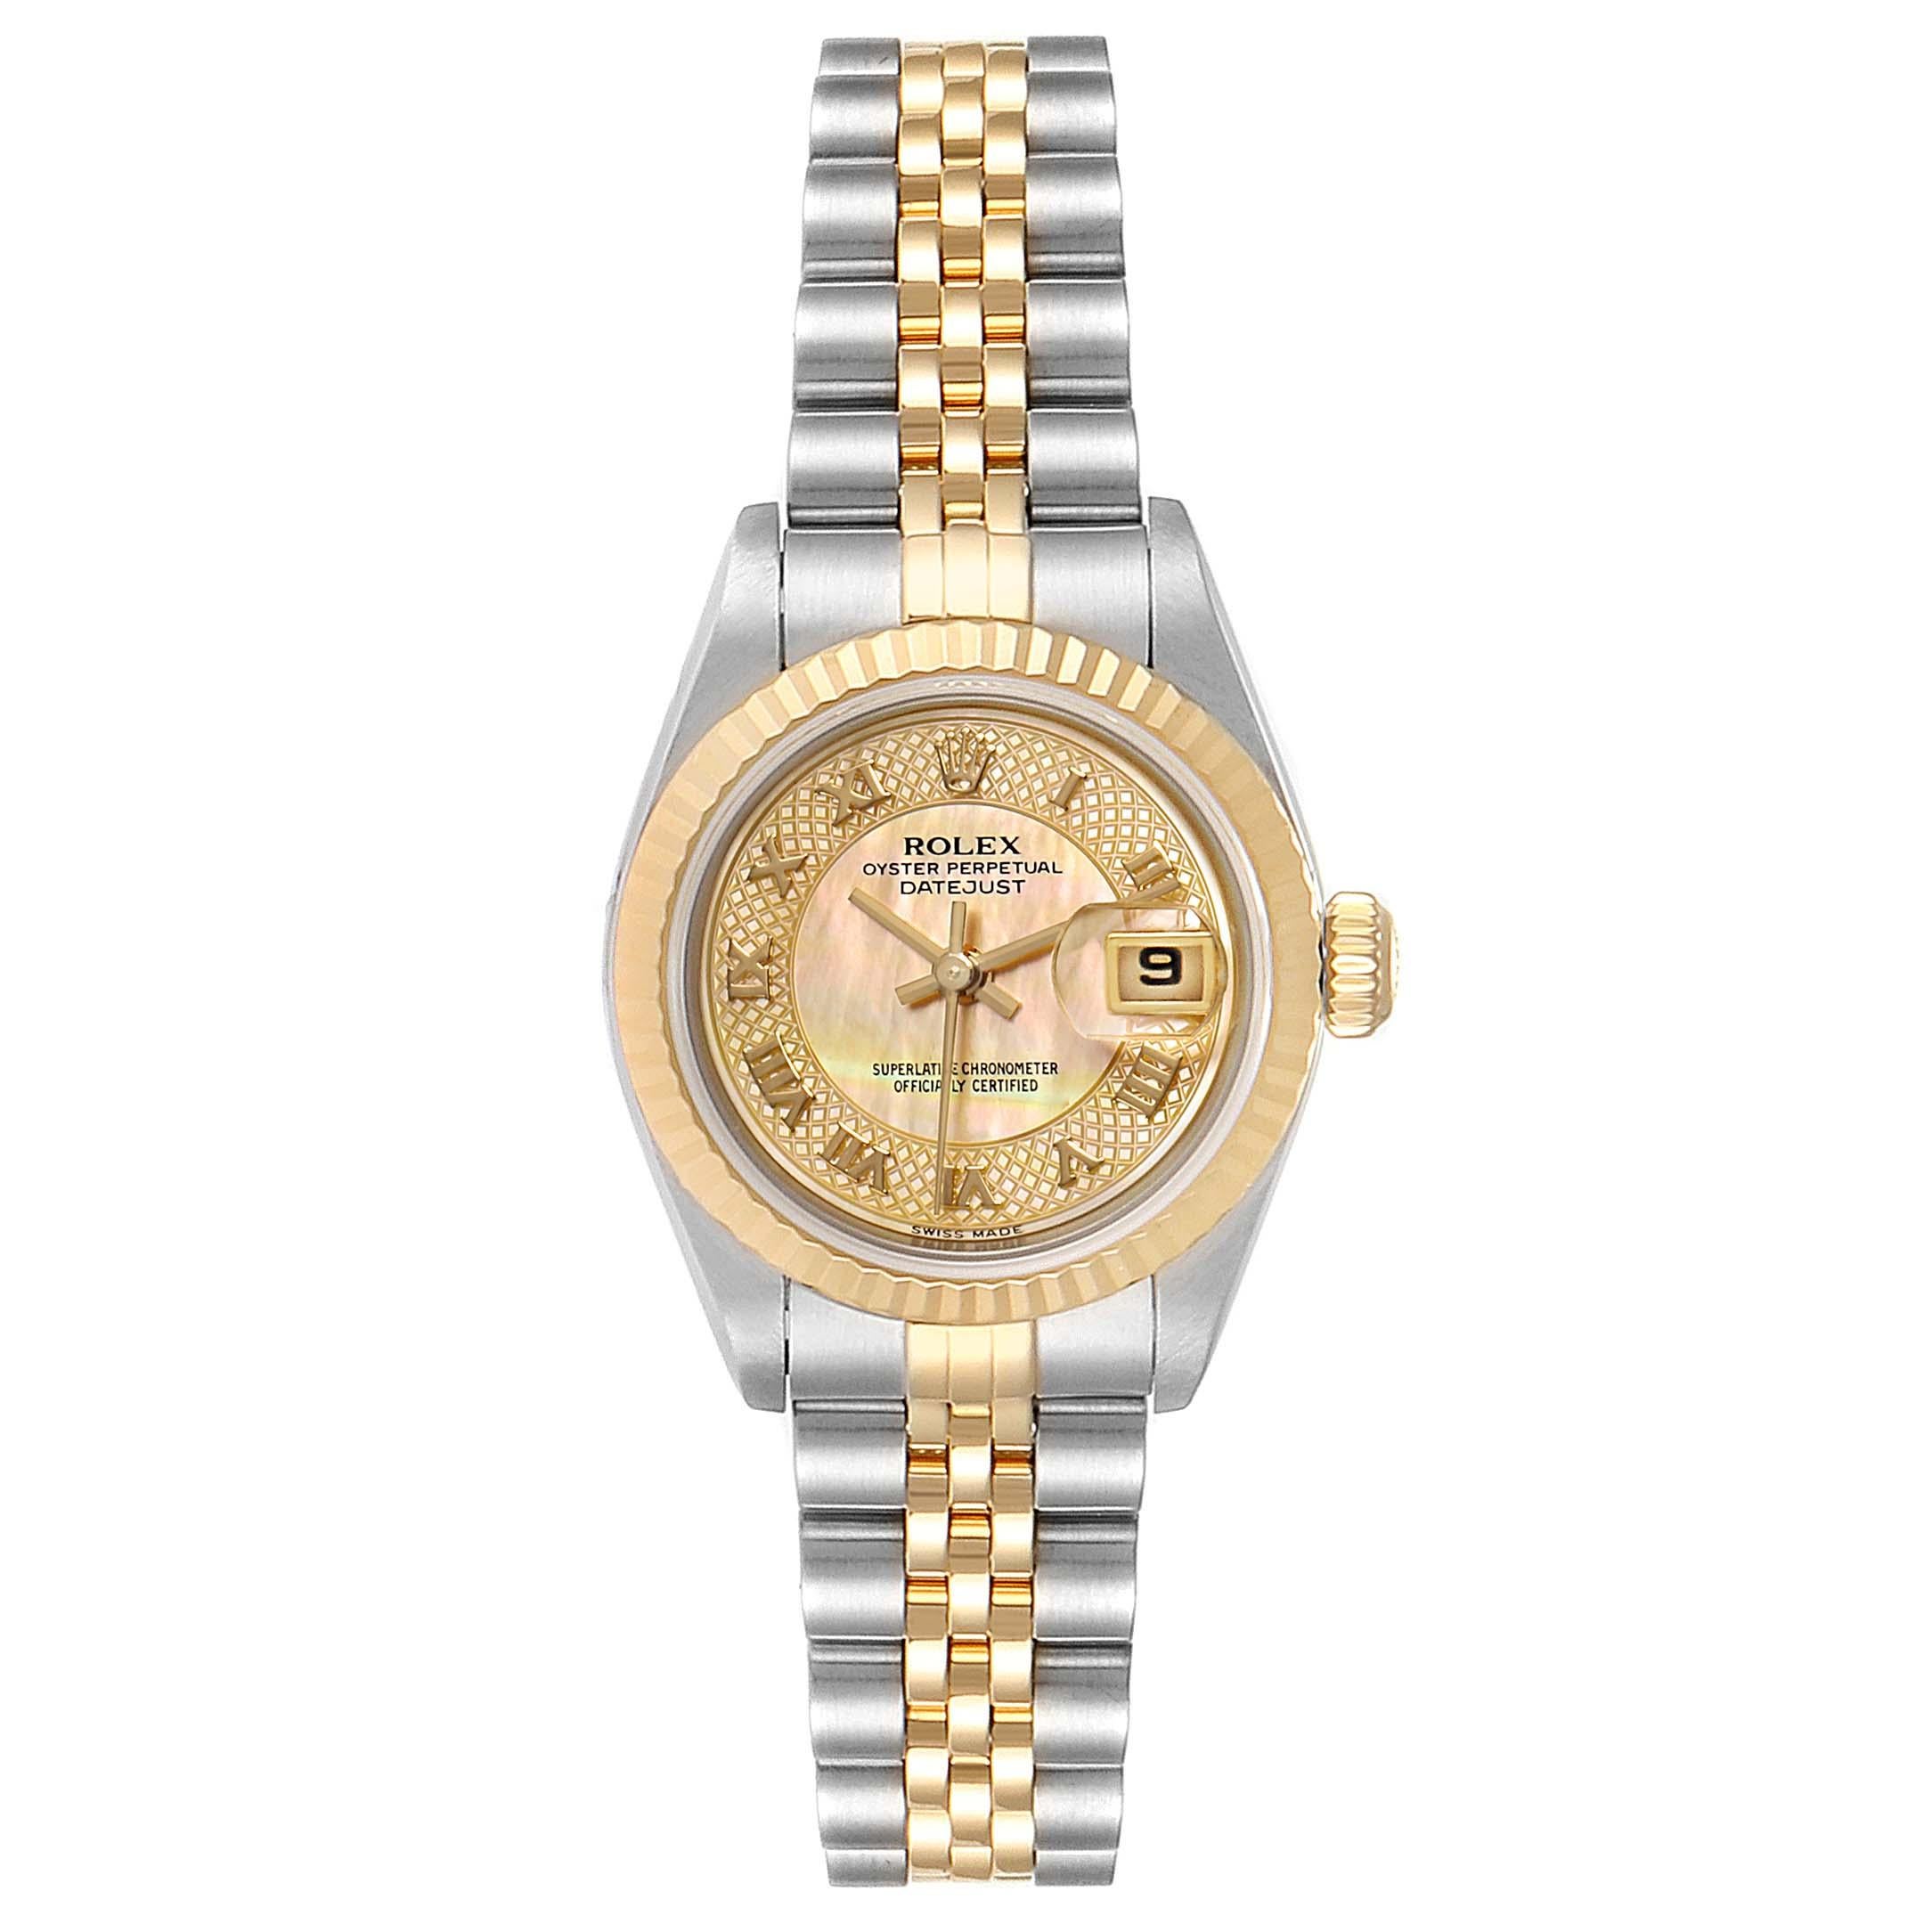 Rolex Datejust Decorated MOP Dial Steel Yellow Gold Ladies Watch 79173. Officially certified chronometer self-winding movement. Stainless steel and 18K yellow gold oyster case 26.0 mm in diameter. Rolex logo on a crown. 18k yellow gold fluted bezel.